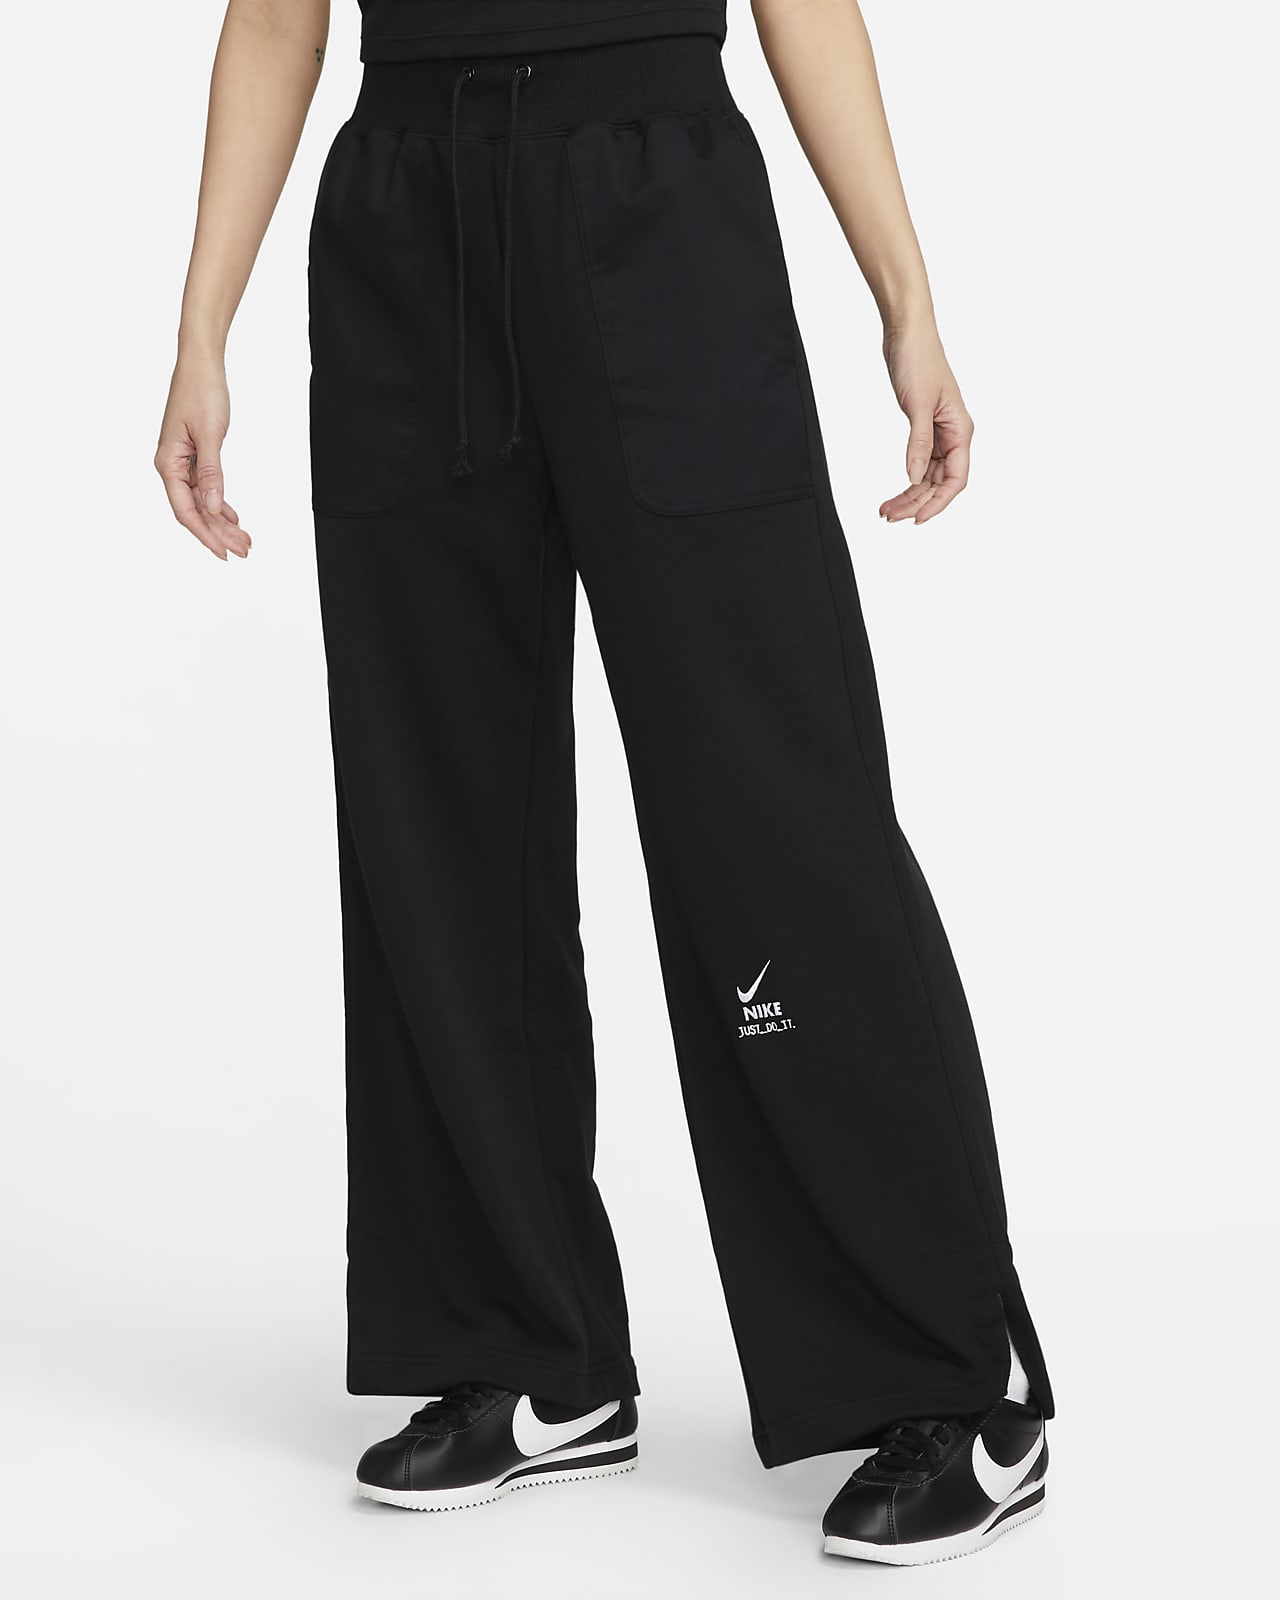 Nike Sportswear City Utility Women's High-Waisted French Terry Trousers